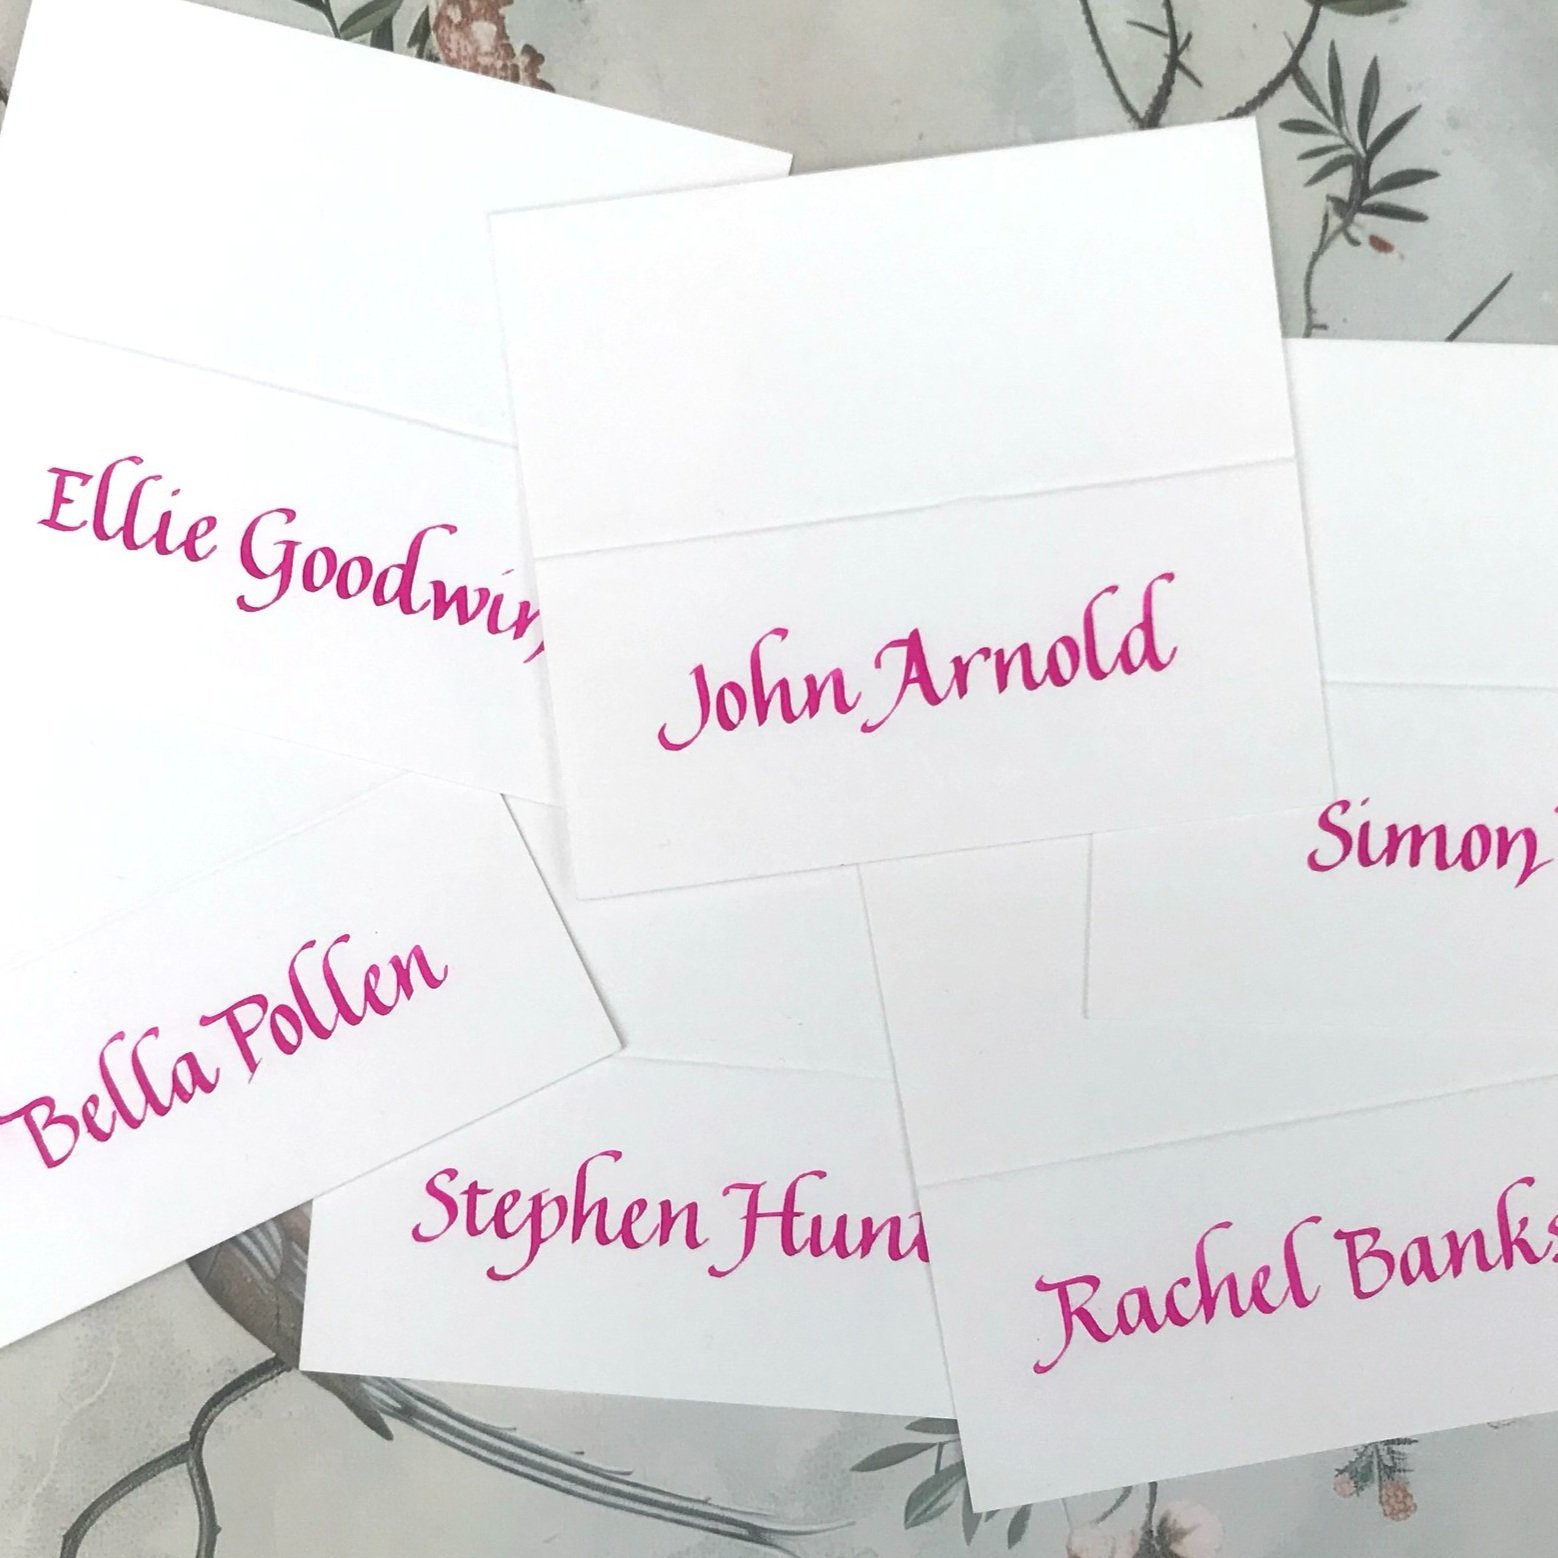 Calligraphy on place cards